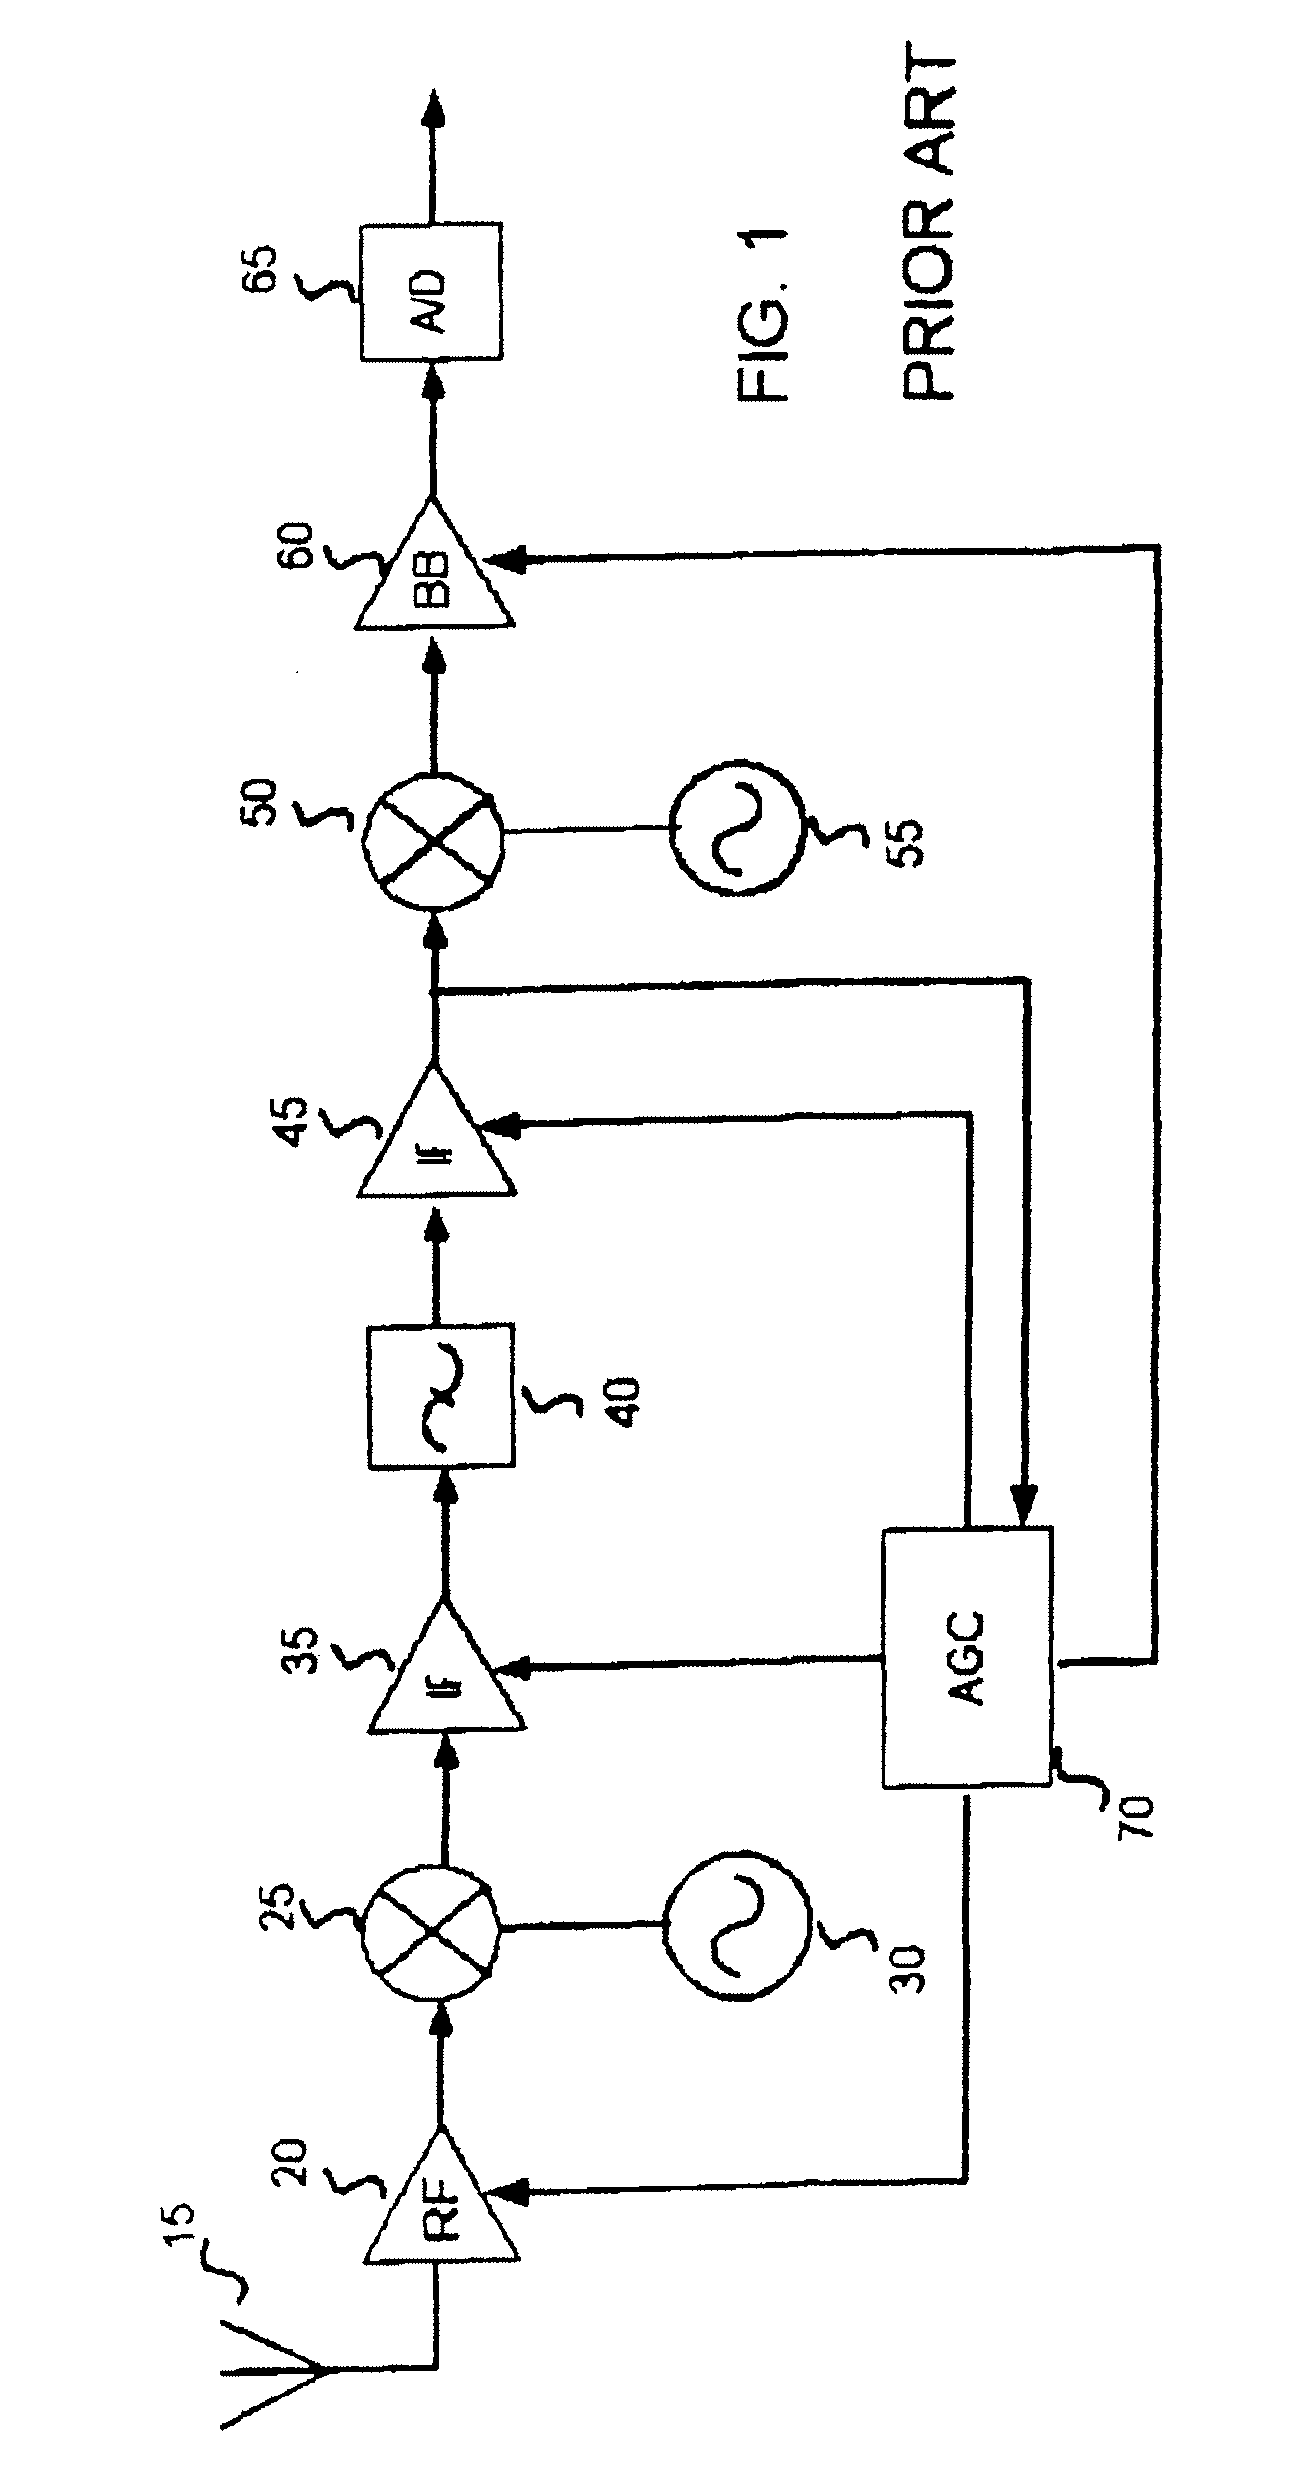 Method And System For Noise Floor Calibration And Receive Signal Strength Detection